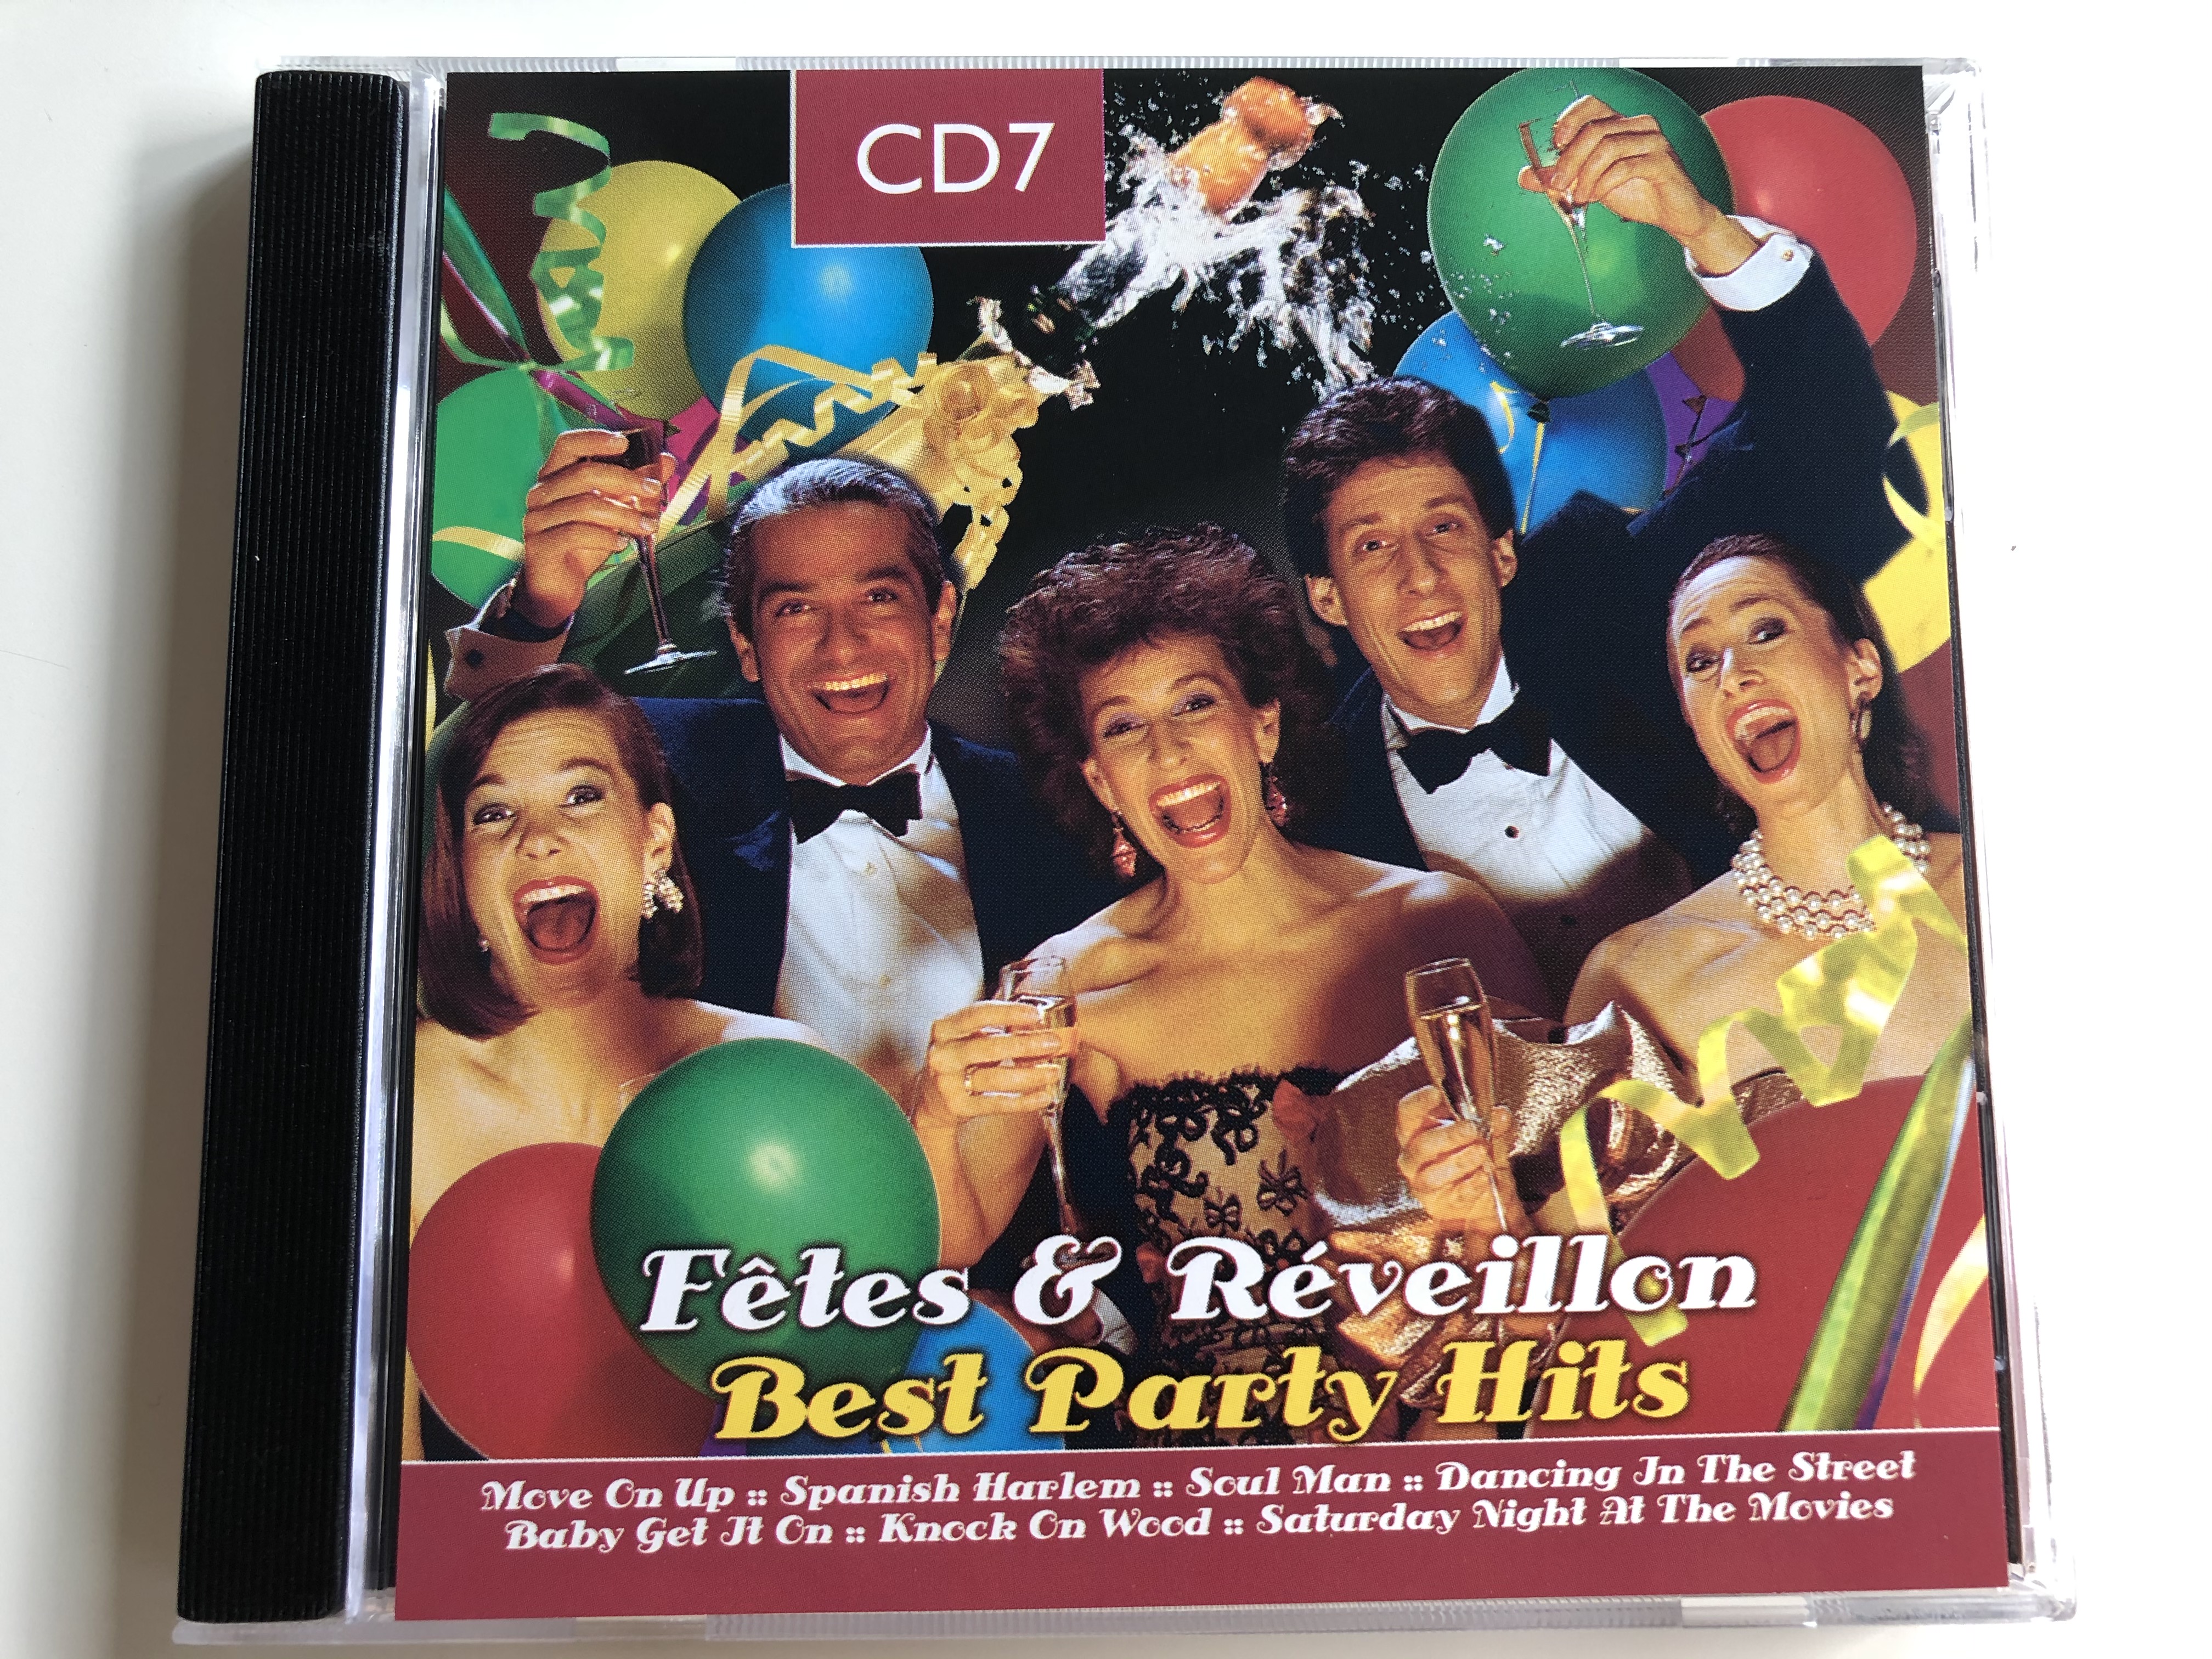 fetes-reveillon-best-party-hits-cd-7-move-on-up-spanish-harlem-soul-man-dancing-in-the-street-baby-get-it-on-knock-on-wood-saturday-night-at-the-movies-audio-cd-2006-kbox813g-1-.jpg